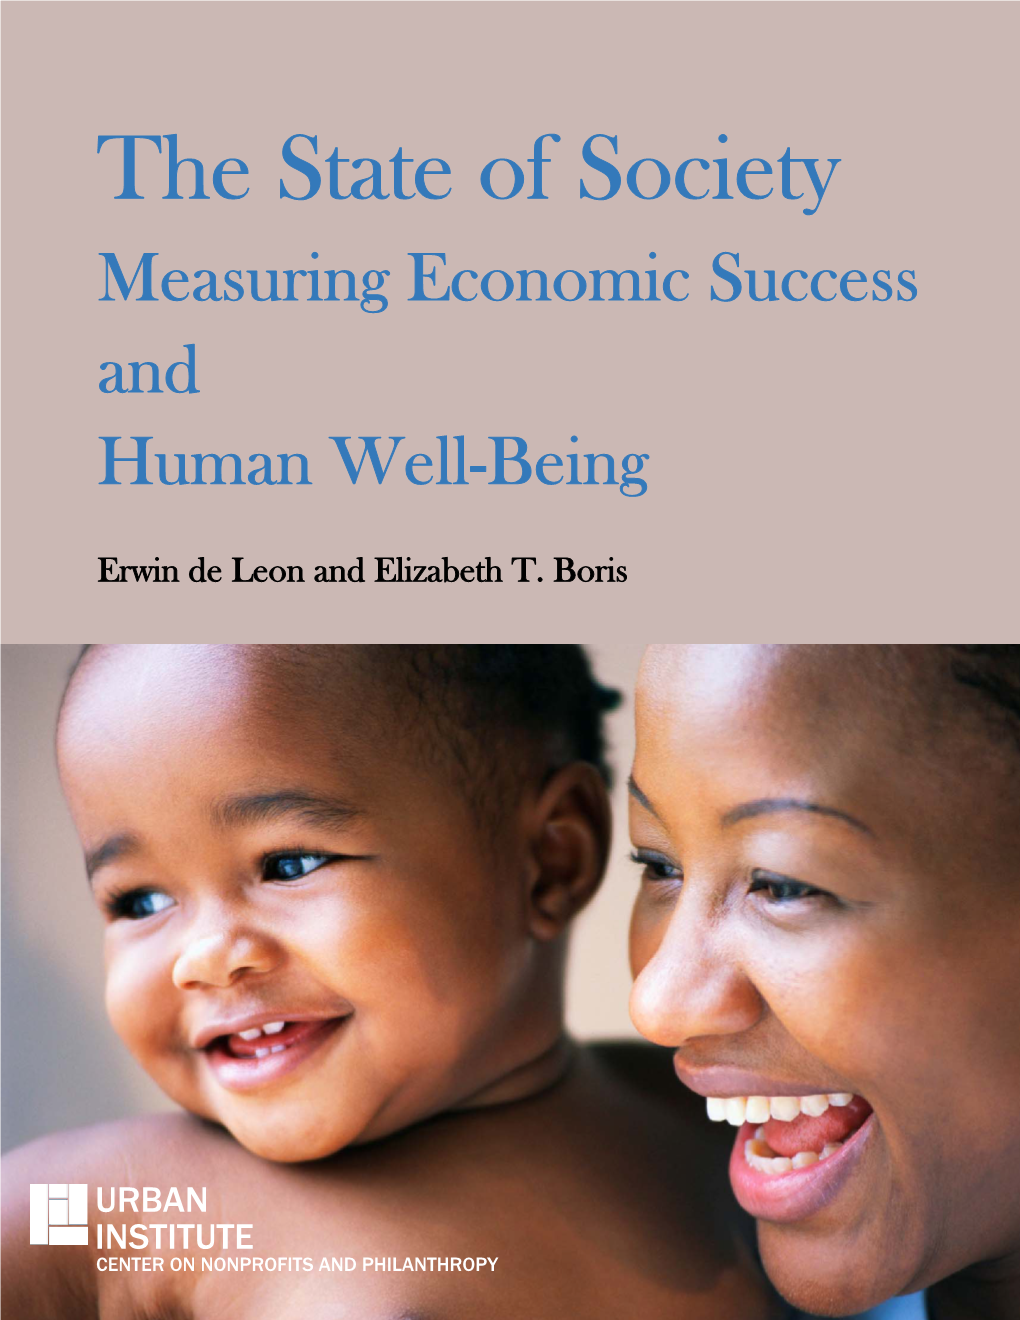 Measuring Economic Success and Human Well-Being